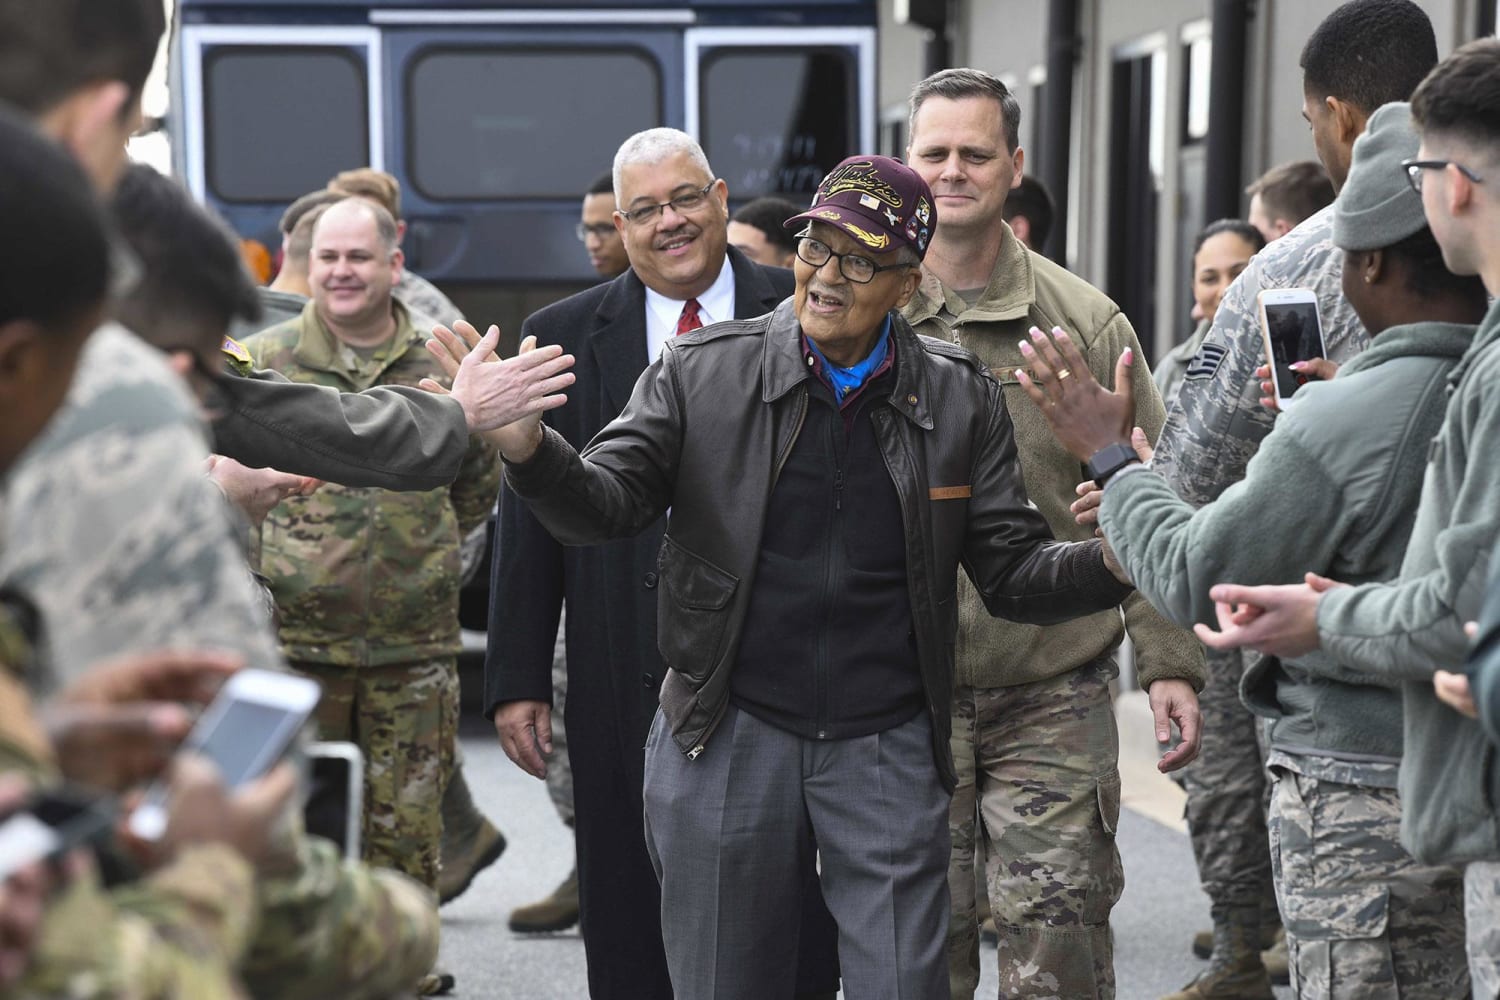 Former Tuskegee Airman, retired USAF Col. Charles McGee, center, high-fives Airmen during his visit Dec 6, 2019, at Dover AFB, Delaware